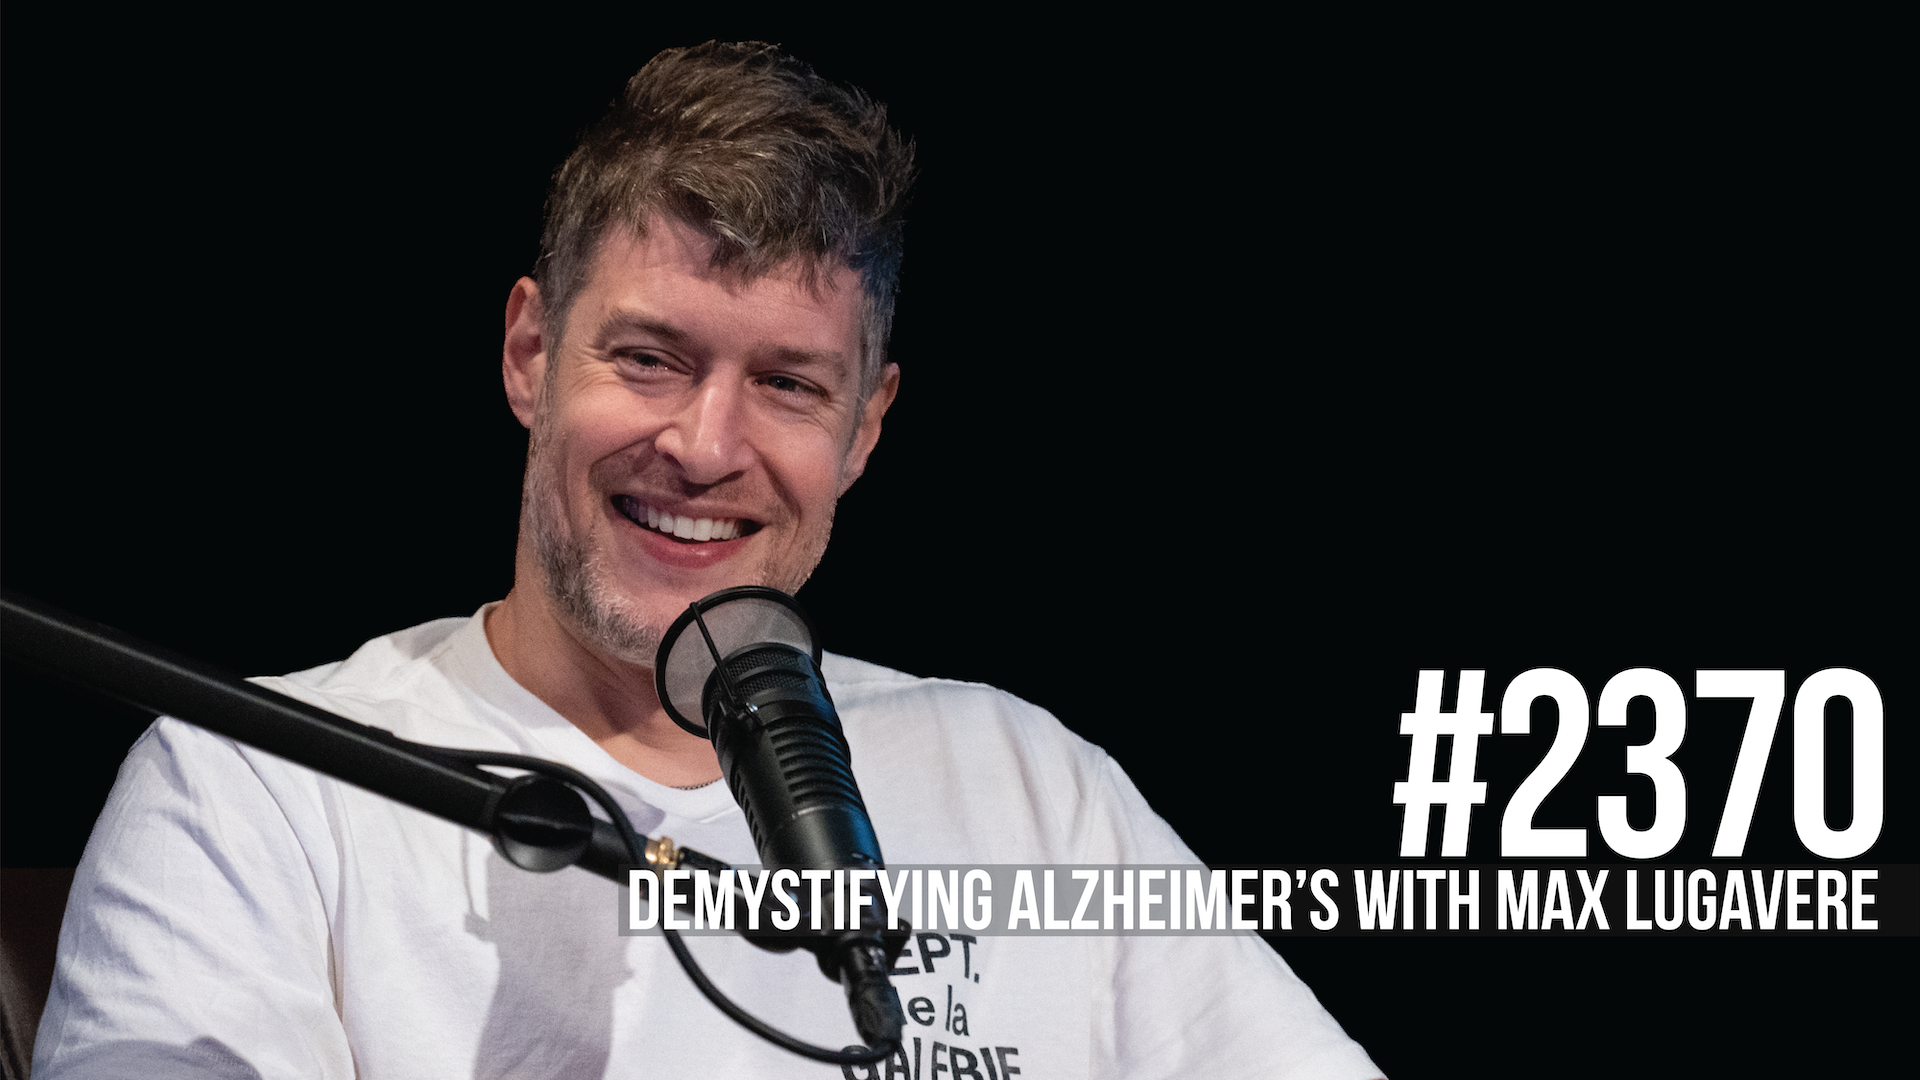 2370: Demystifying Alzheimer’s With Max Lugavere